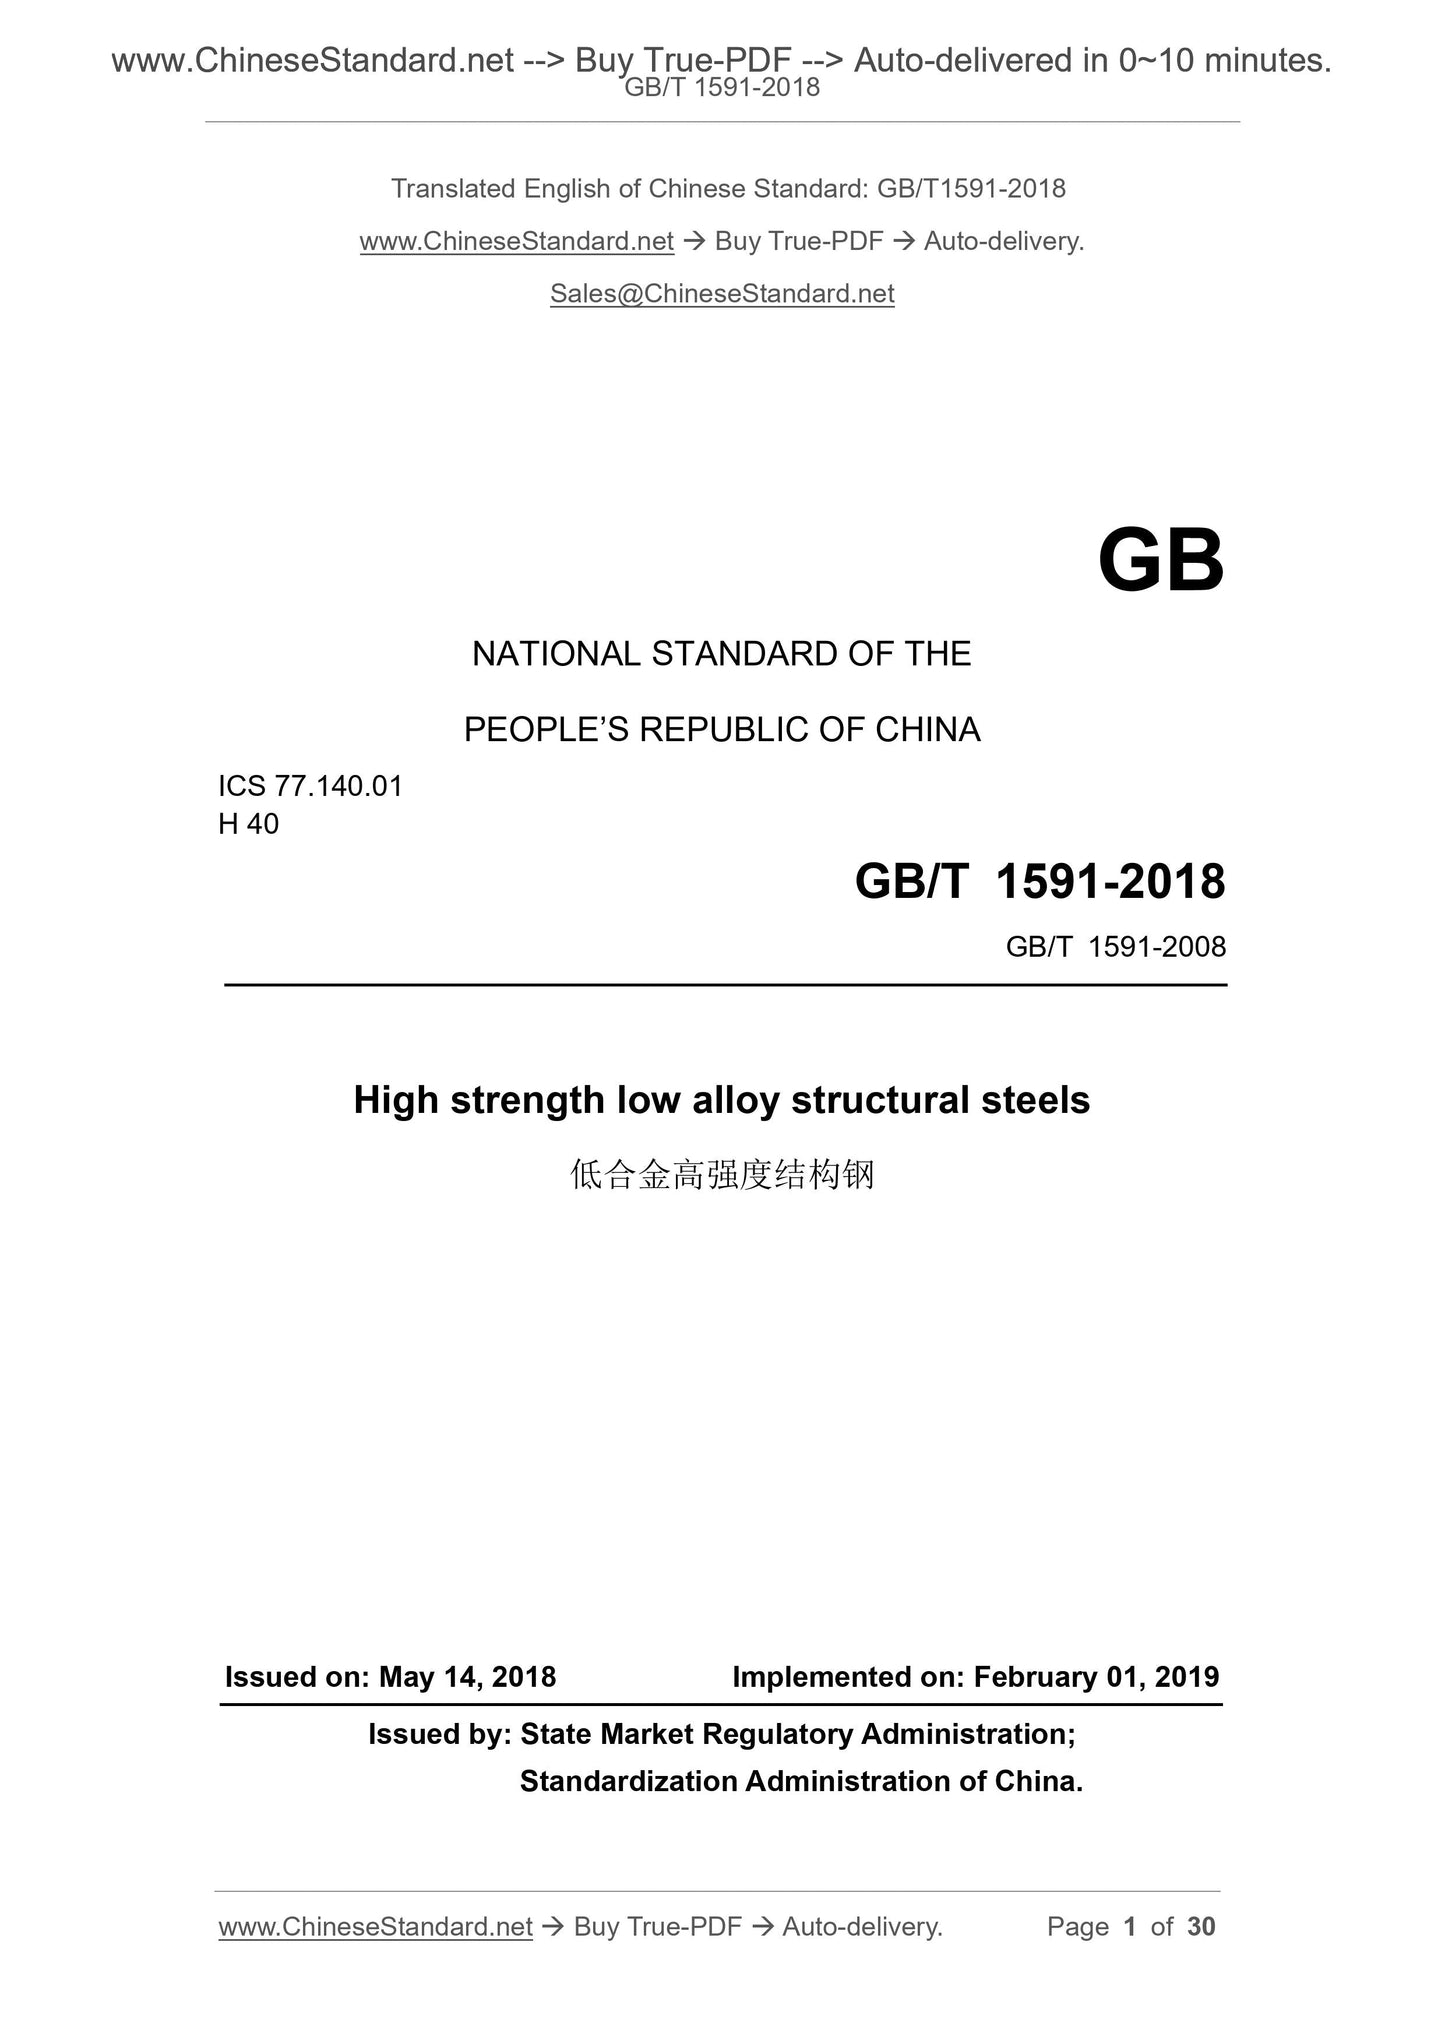 GB/T 1591-2018 Page 1